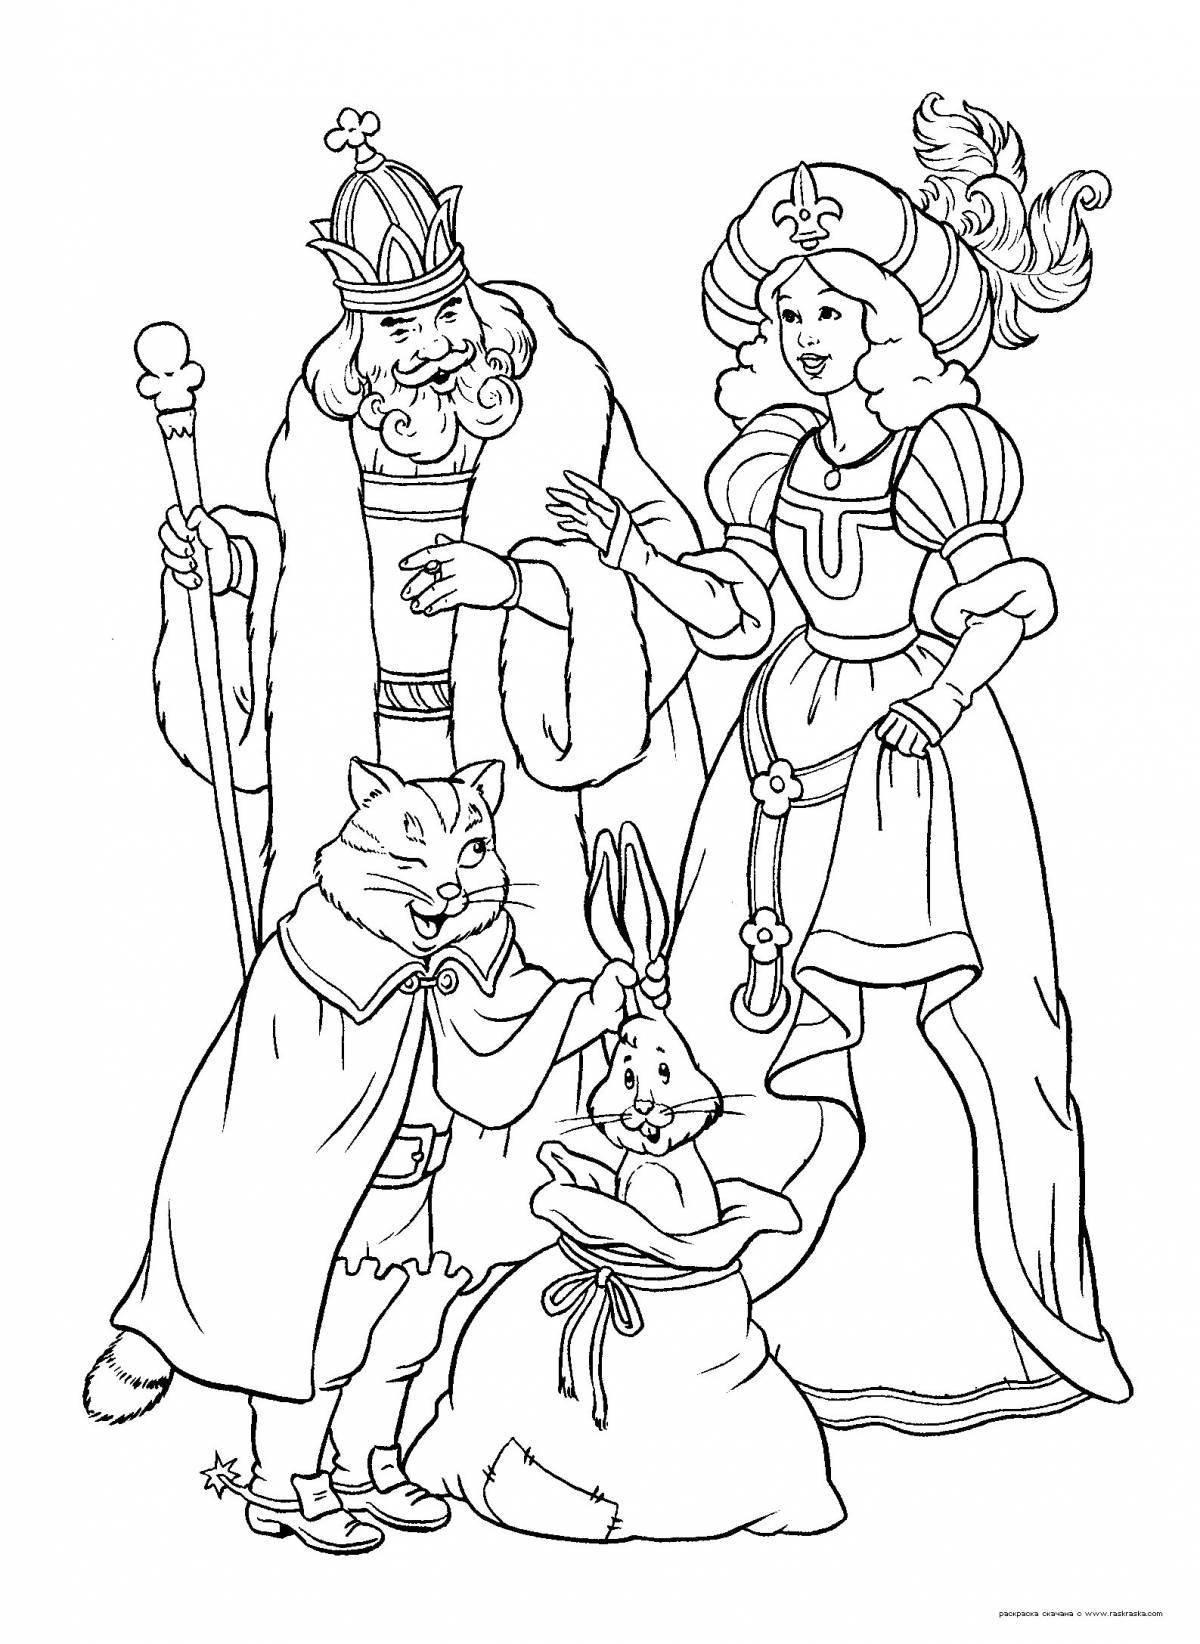 Luxury king and queen coloring page